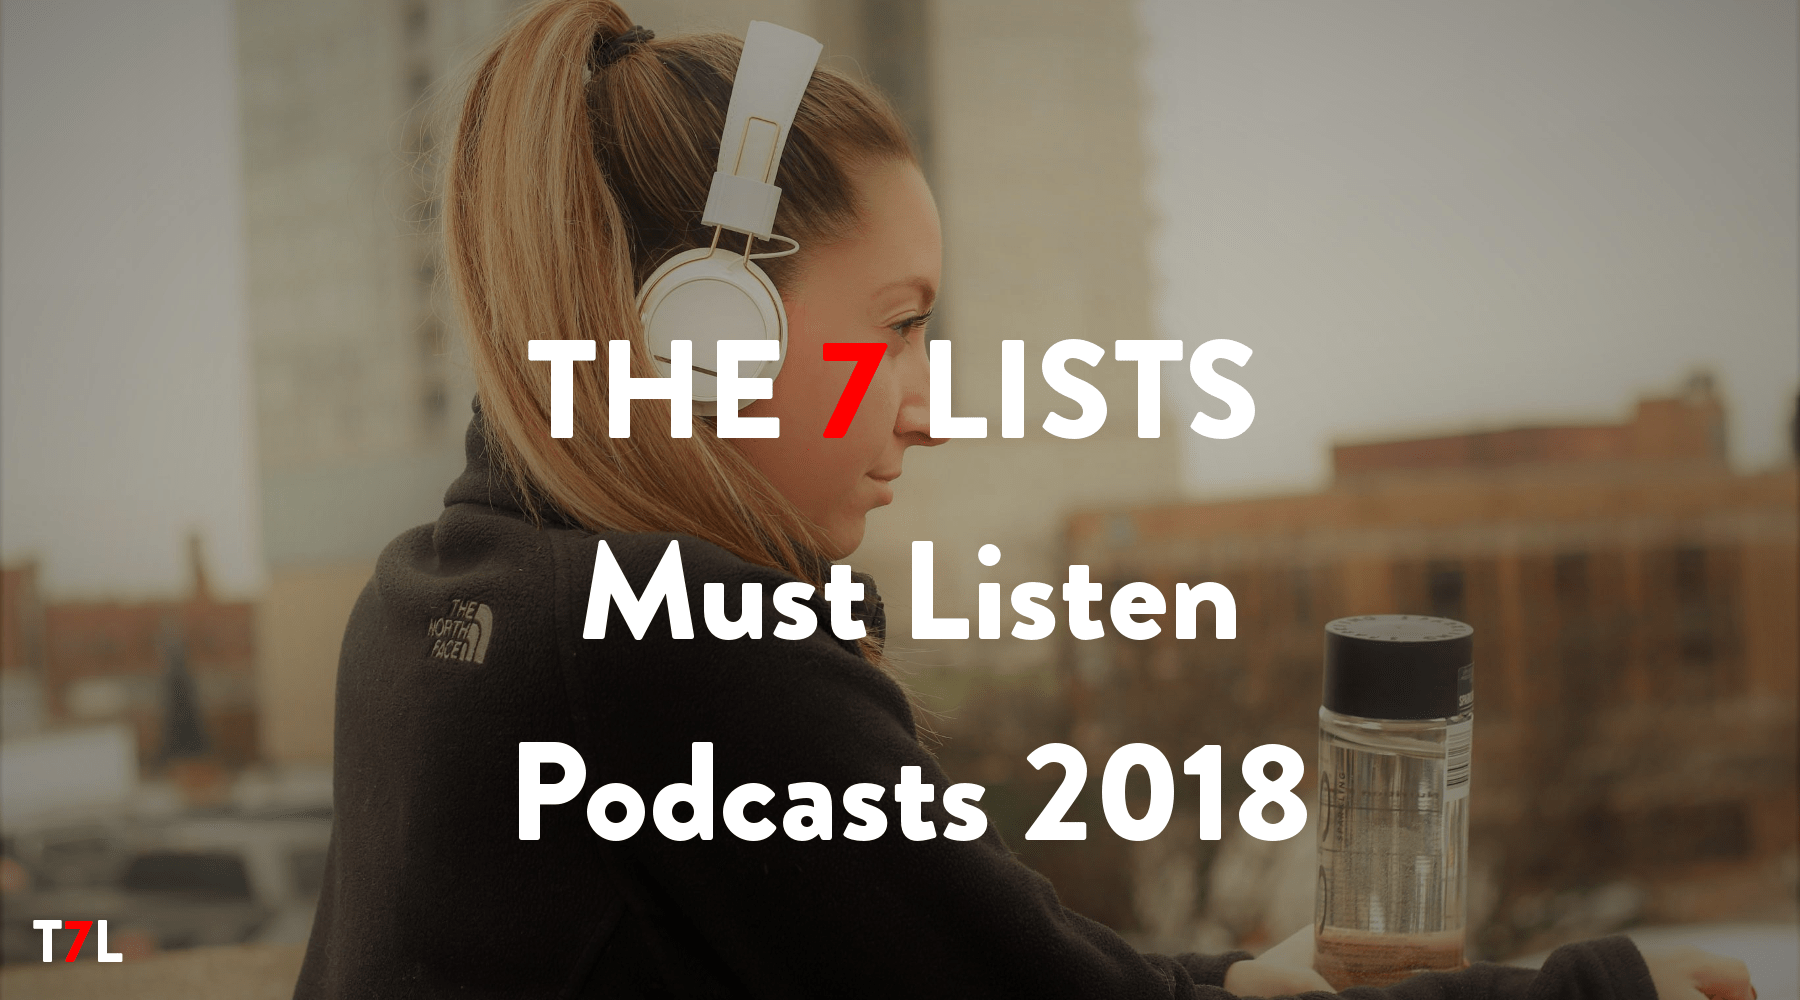 THE 7 LISTS_Podcasts